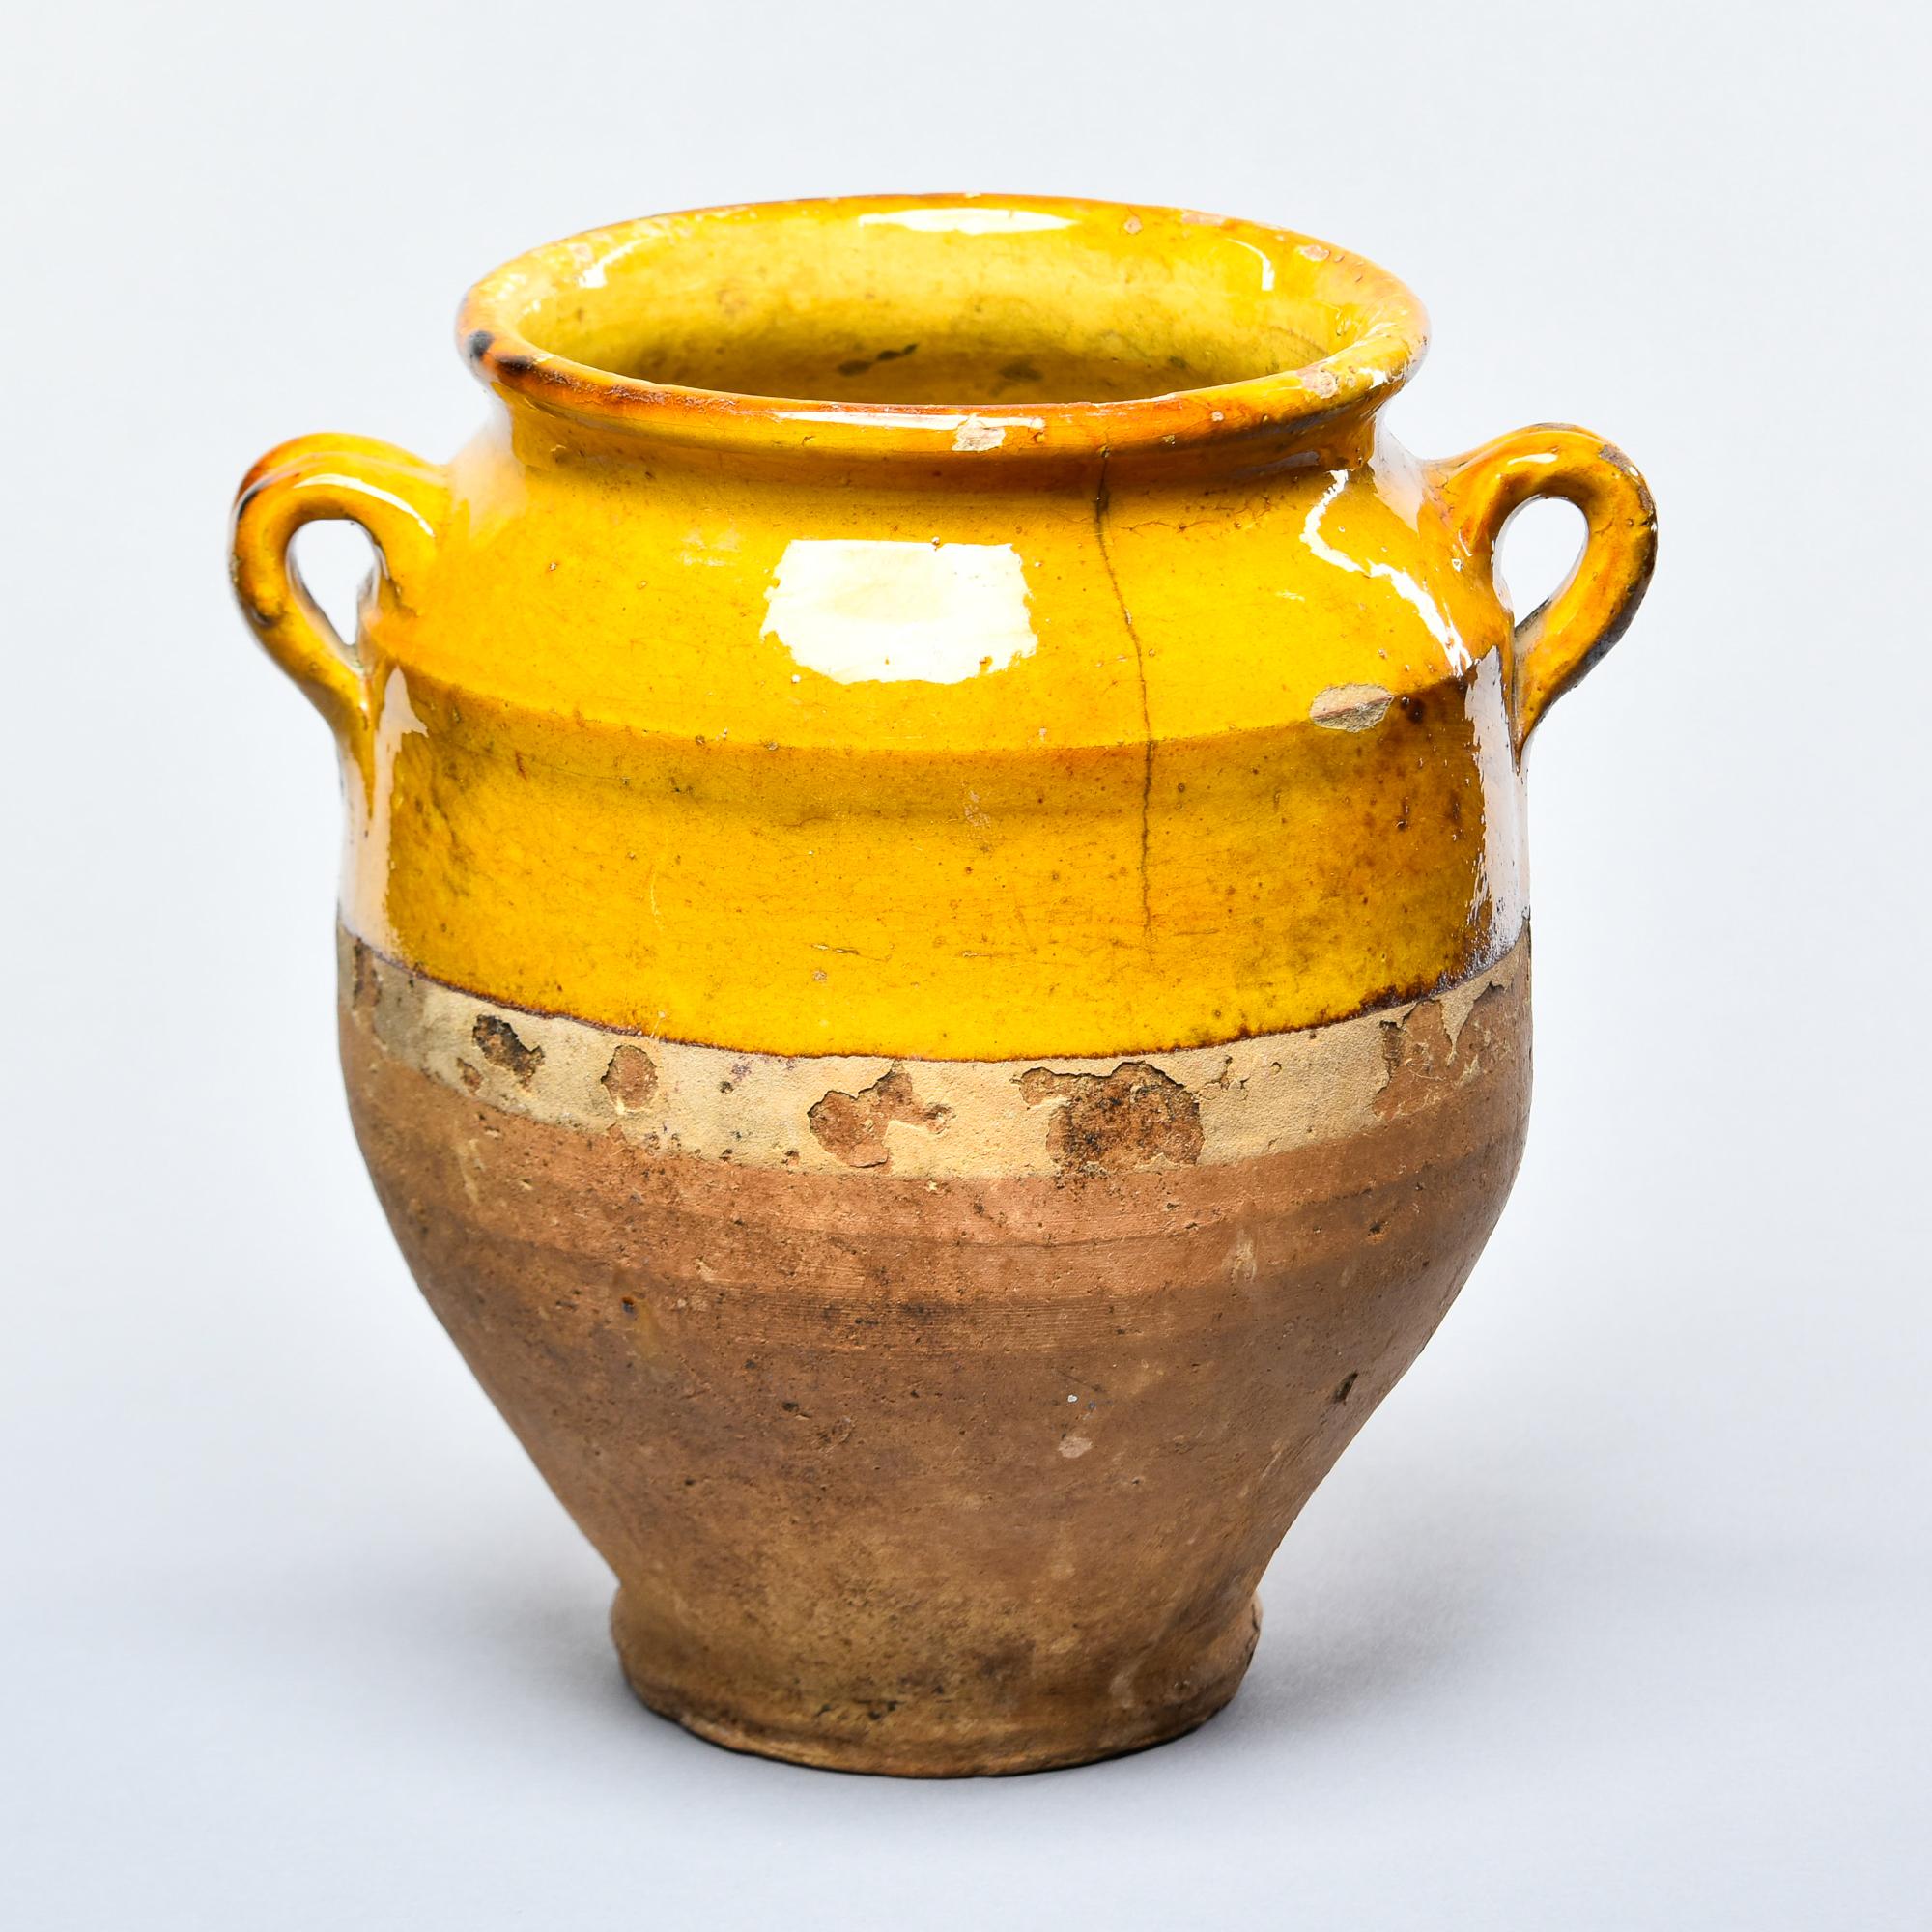 Found in France, this French confit jar dates from approximately 1915. This piece stands 9.5” high and has the traditional form with a wide vessel body and two handles on the sides with a mustard-colored glaze on the outside top half and fully